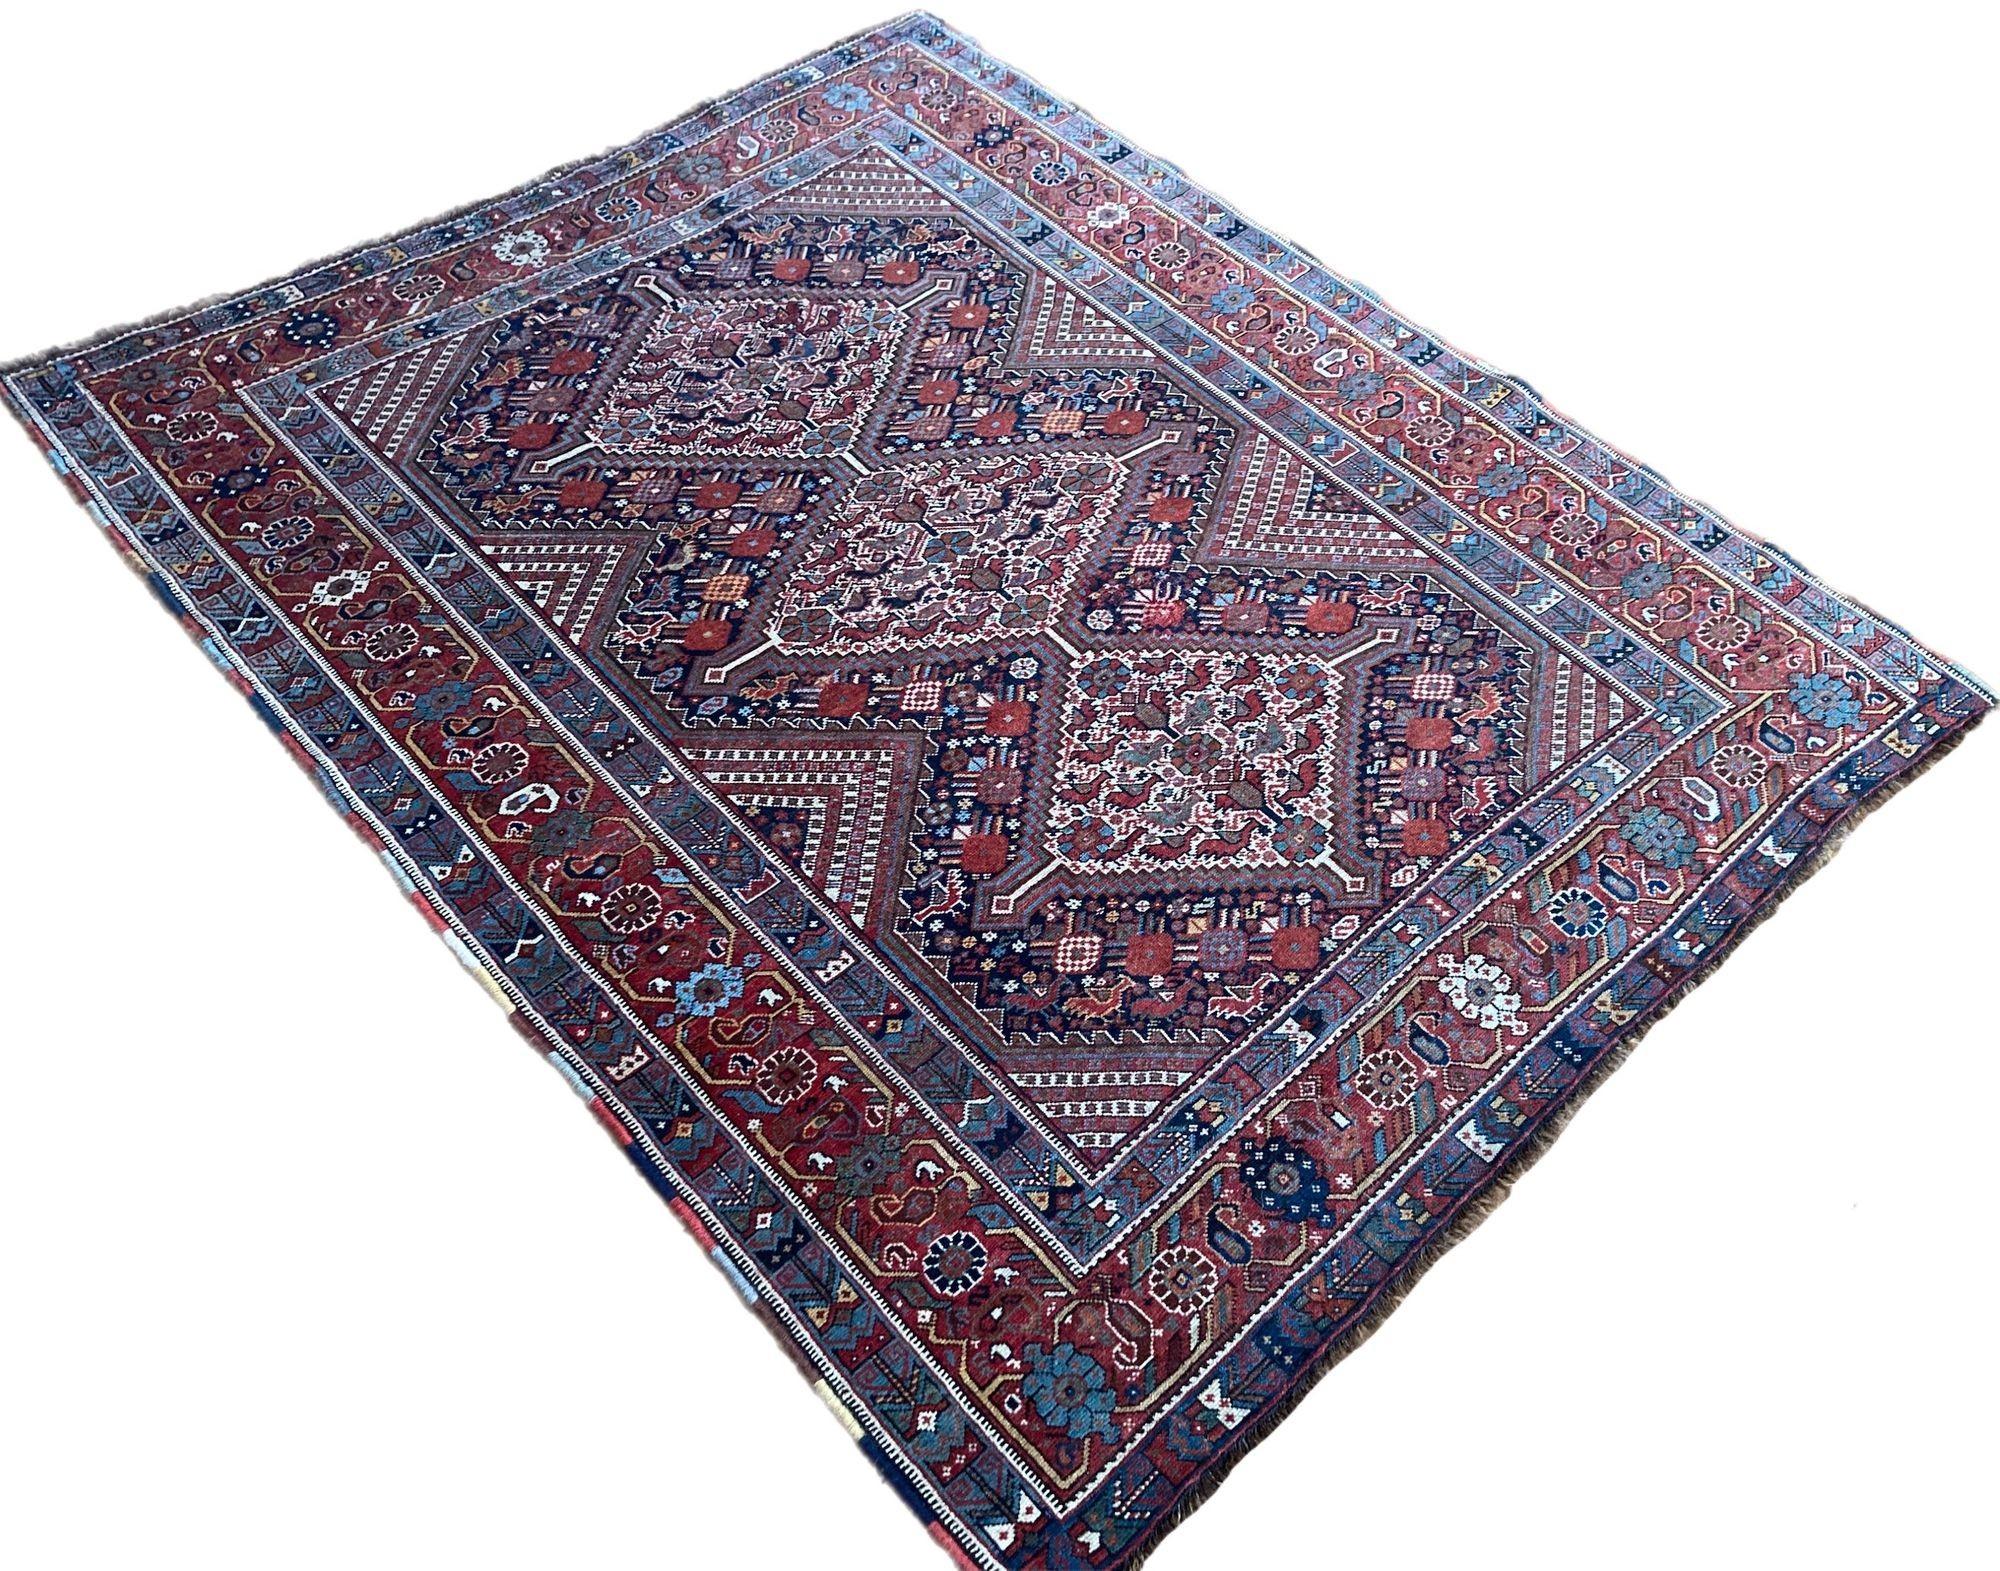 Antique Khamseh Rug 1.78m X 1.45m In Good Condition For Sale In St. Albans, GB